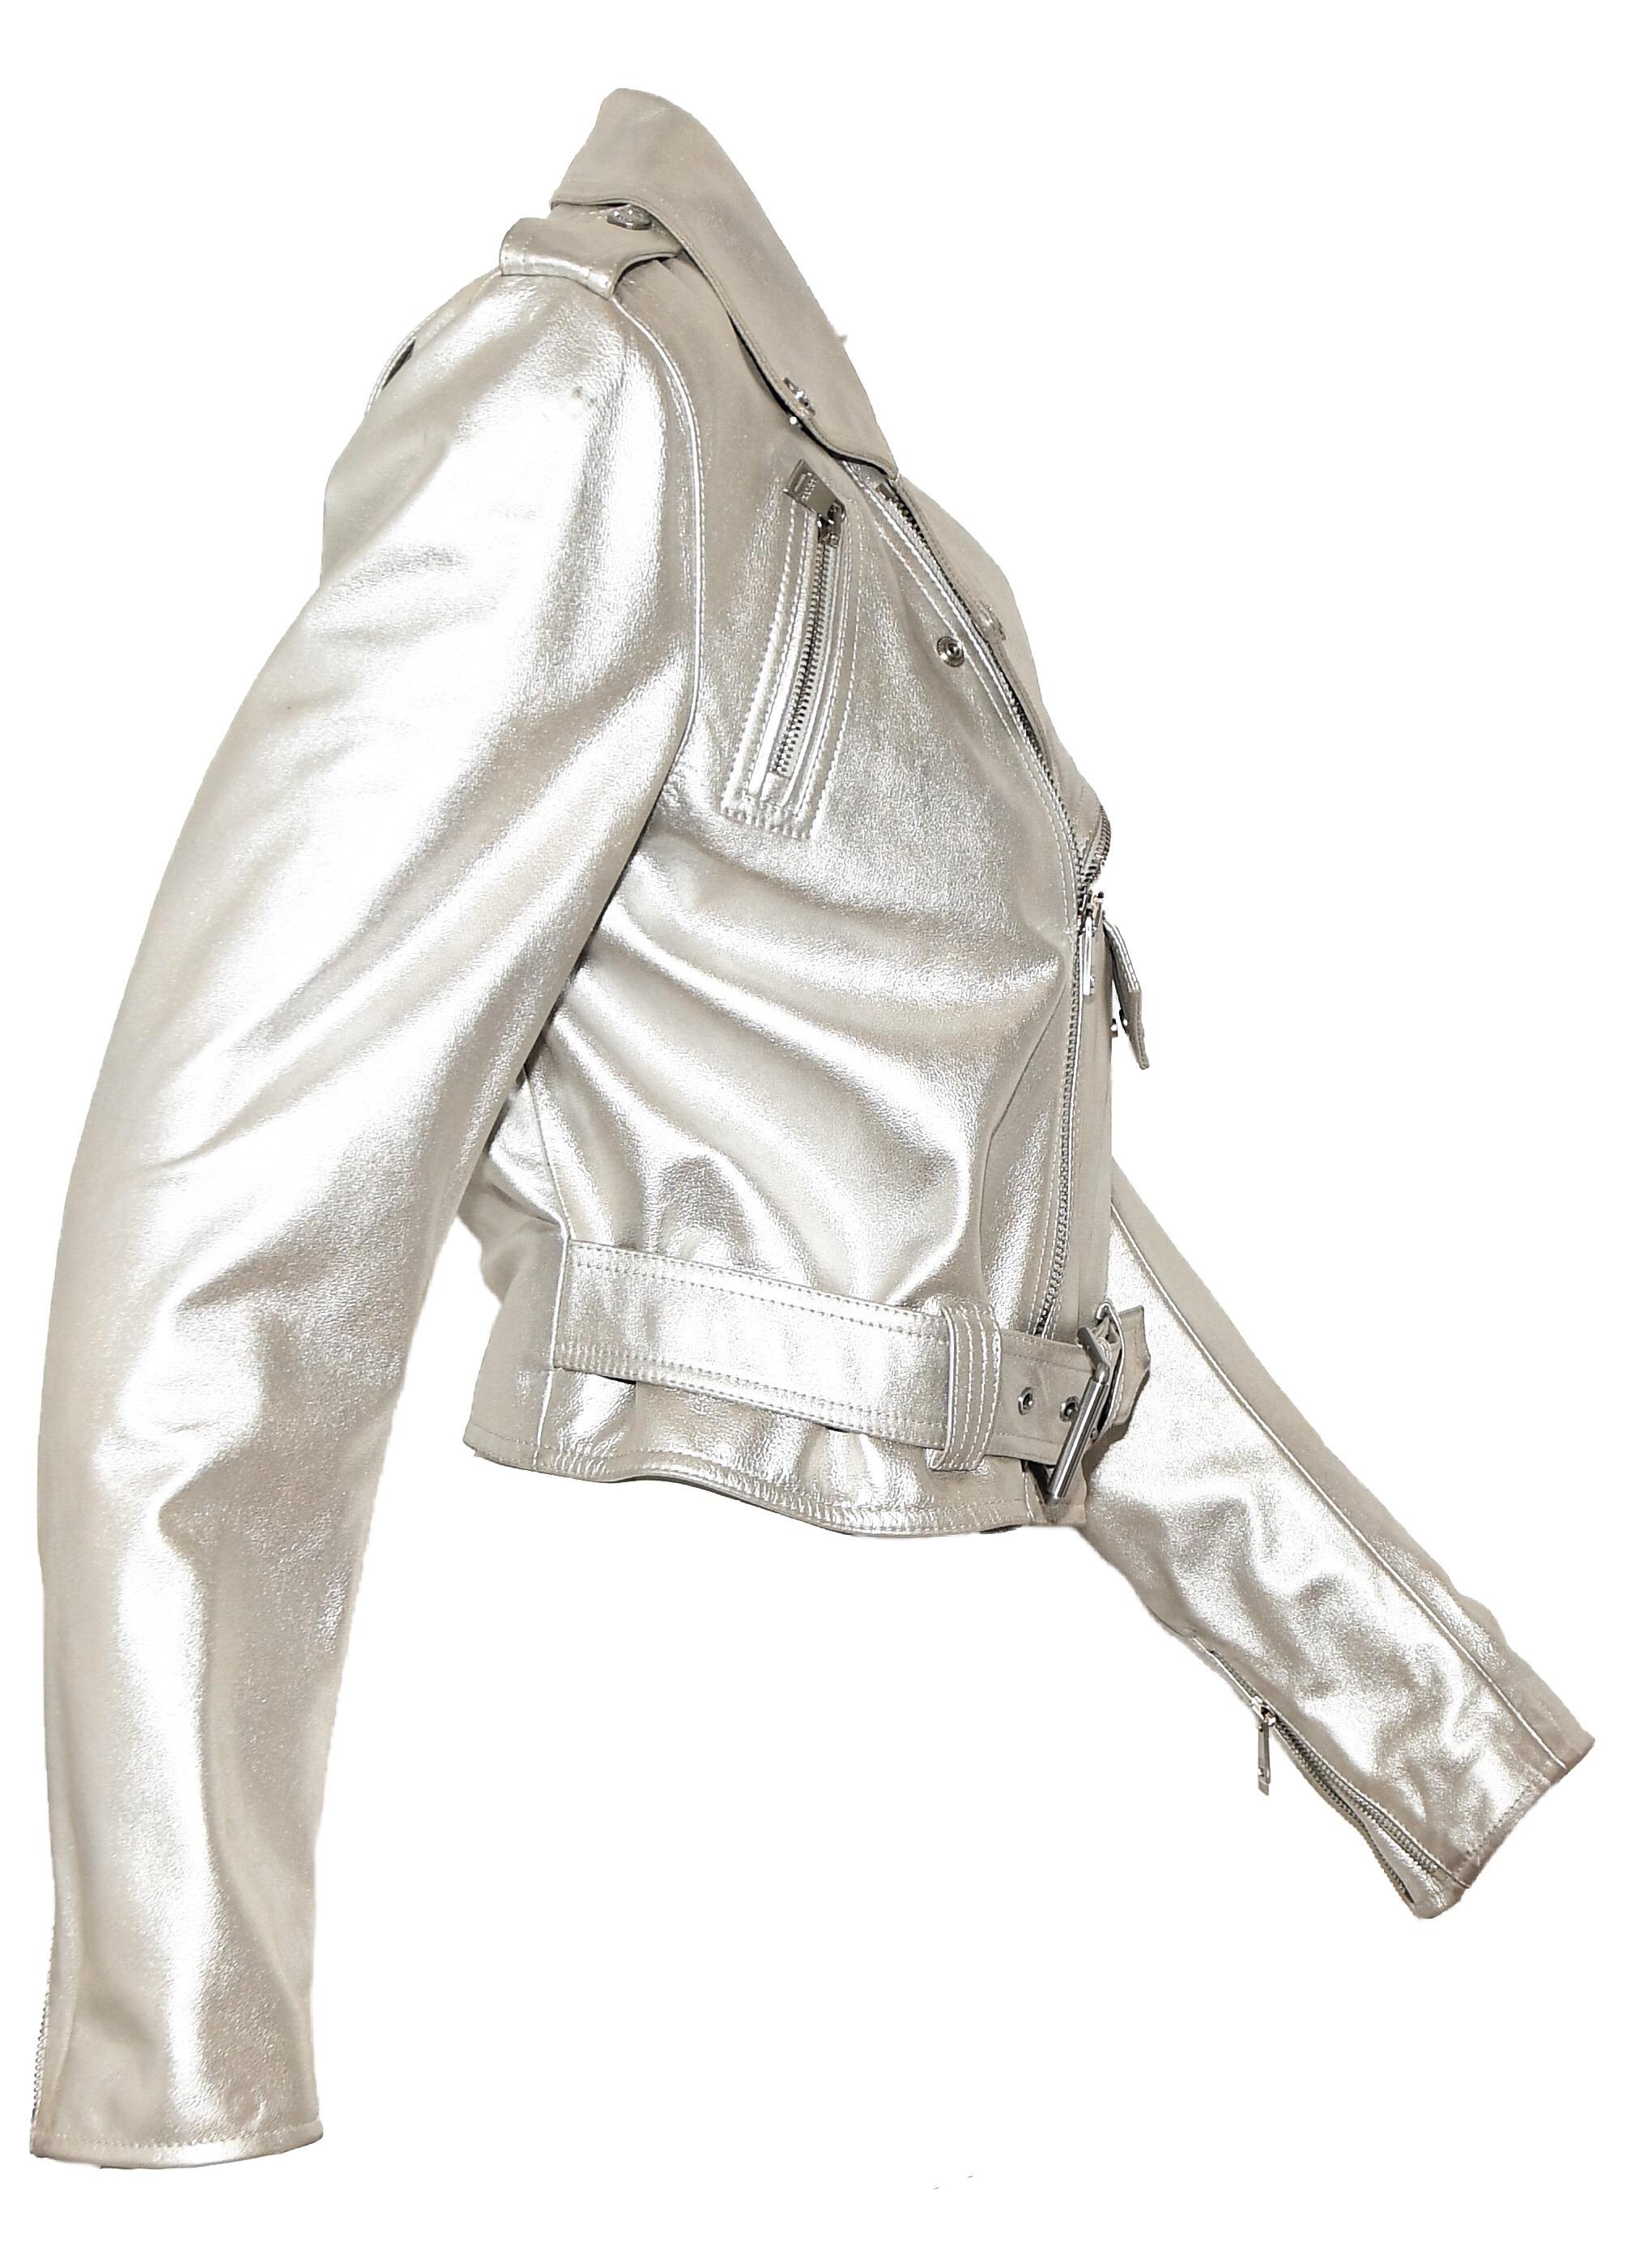 Ralph Lauren silver tone metallic motorcycle jacket contains multiple zippers throughout the jacket.   One front zipper for closure, supported with a belt, at waist.  Two asymmetric pockets each with a zip and, also, at the cuffs.  This silver